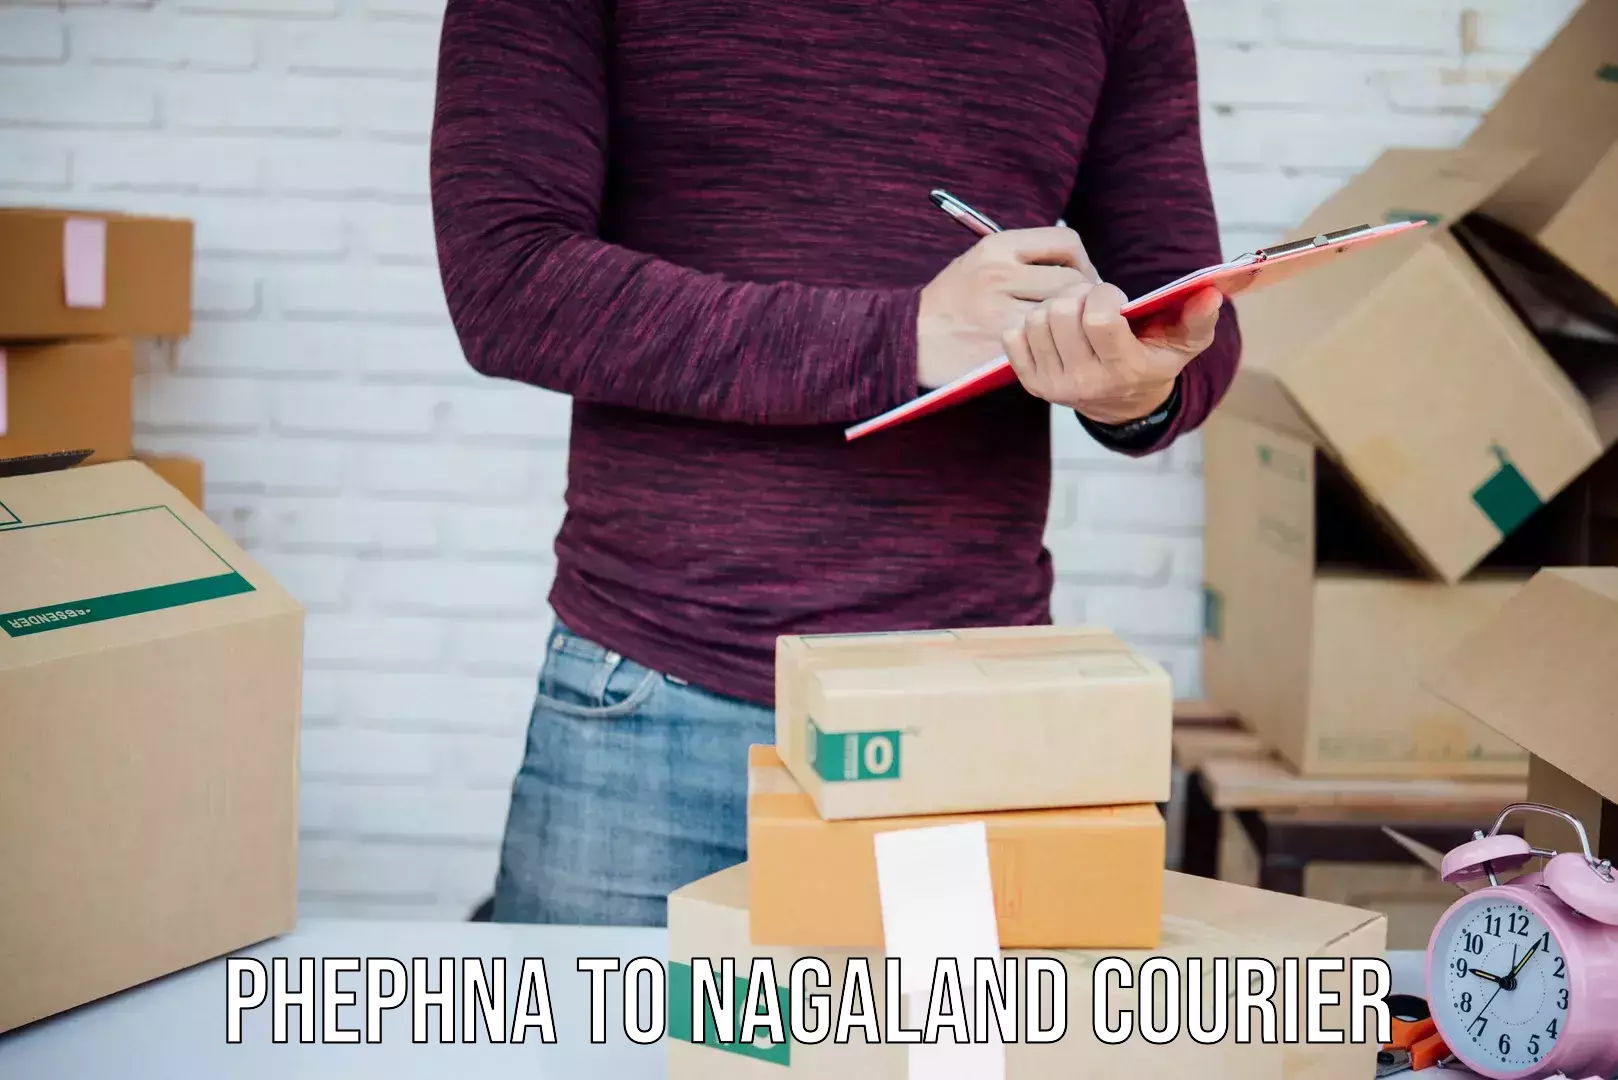 On-demand shipping options Phephna to Kiphire